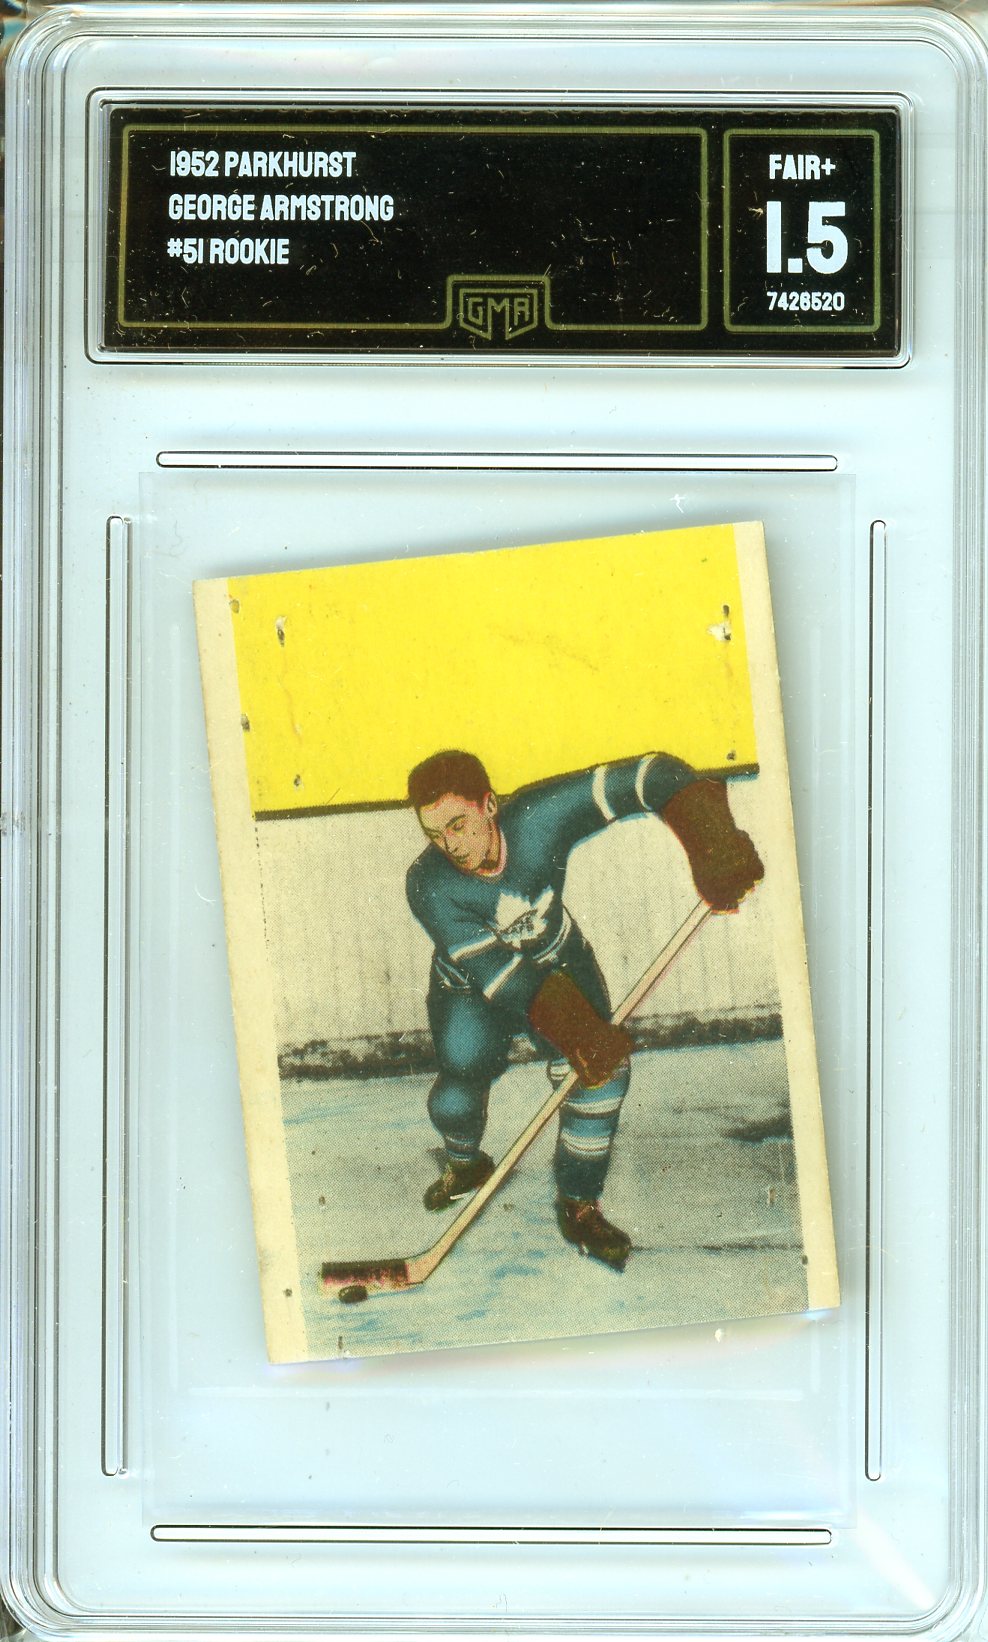 1952 Parkhurst George Armstrong #51 Rookie Card GMA 1.5